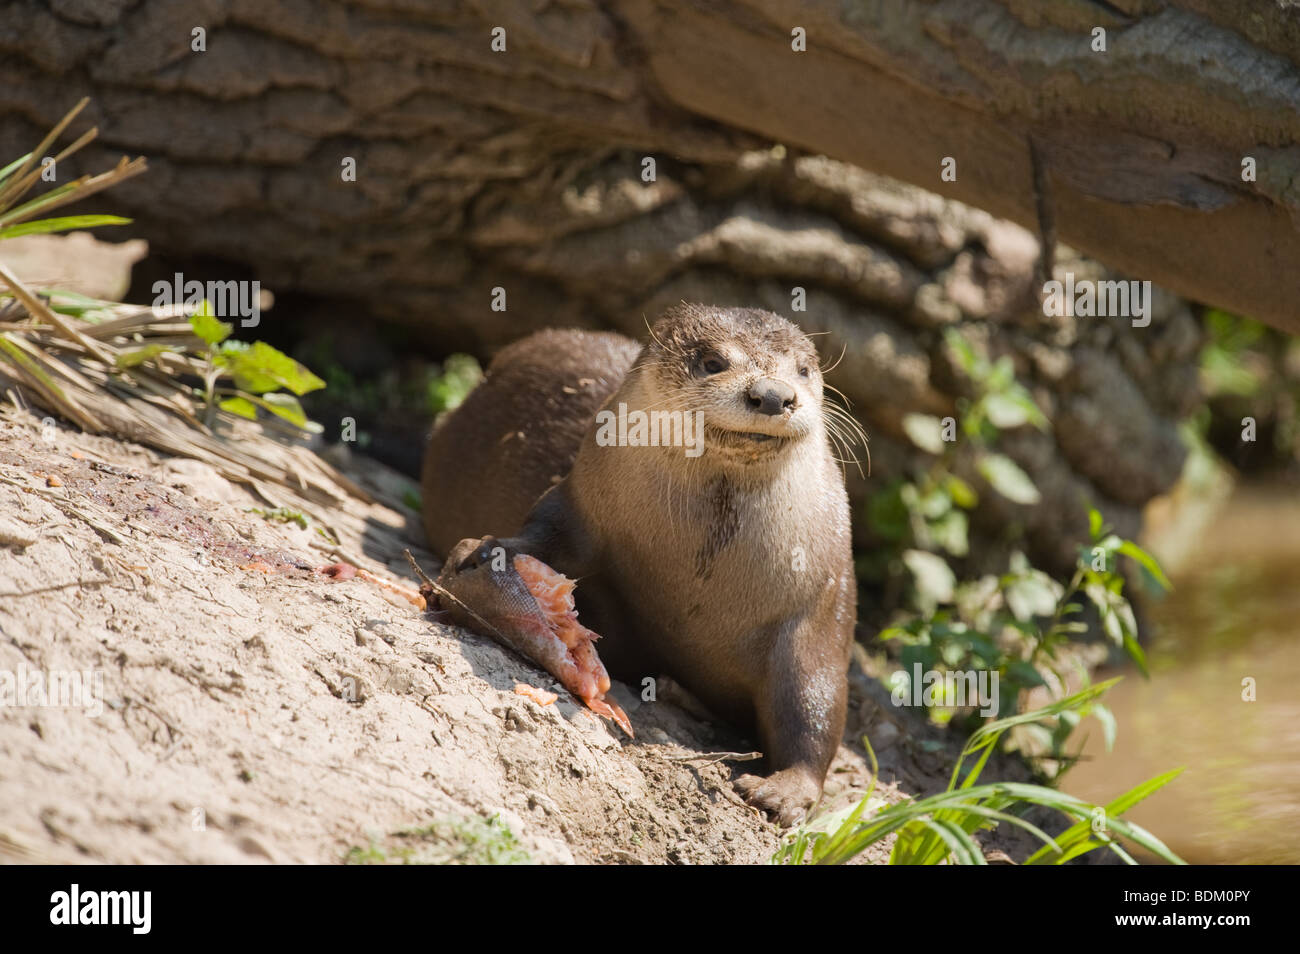 North American River Otter Lontra canadensis feeding on fish on a river bank. Stock Photo